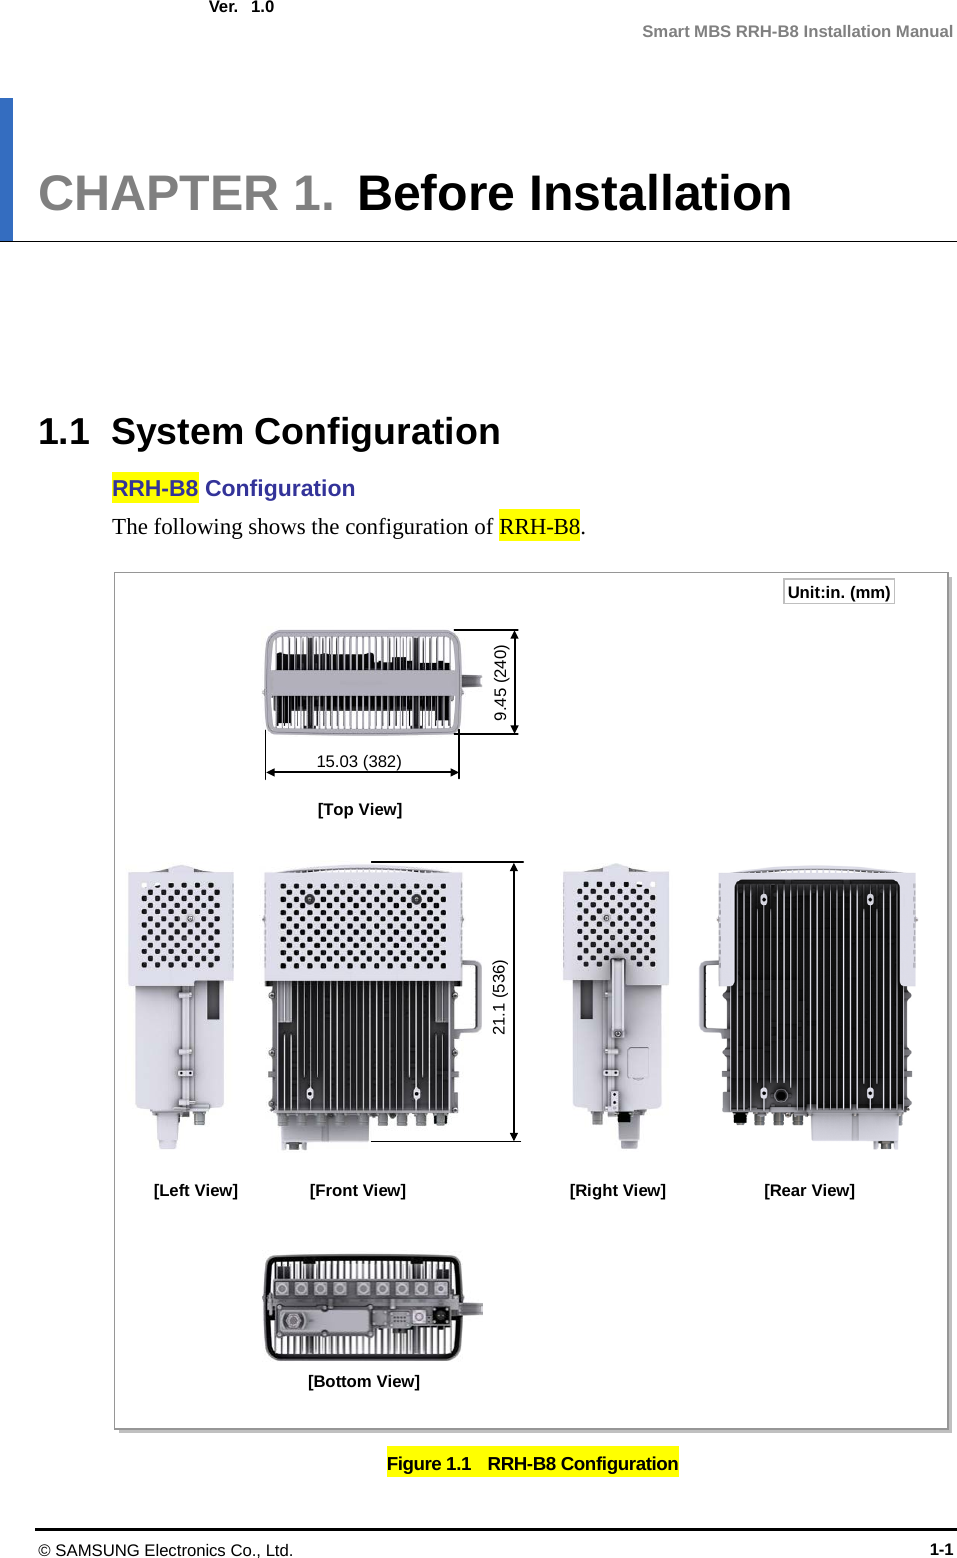  Ver.  Smart MBS RRH-B8 Installation Manual 1.0 CHAPTER 1.  Before Installation      1.1 System Configuration RRH-B8 Configuration The following shows the configuration of RRH-B8.  Figure 1.1  RRH-B8 Configuration [Top View] [Front View] [Bottom View] [Right View] [Left View] [Rear View] 21.1 (536) 9.45 (240) 15.03 (382) Unit:in. (mm) © SAMSUNG Electronics Co., Ltd. 1-1 